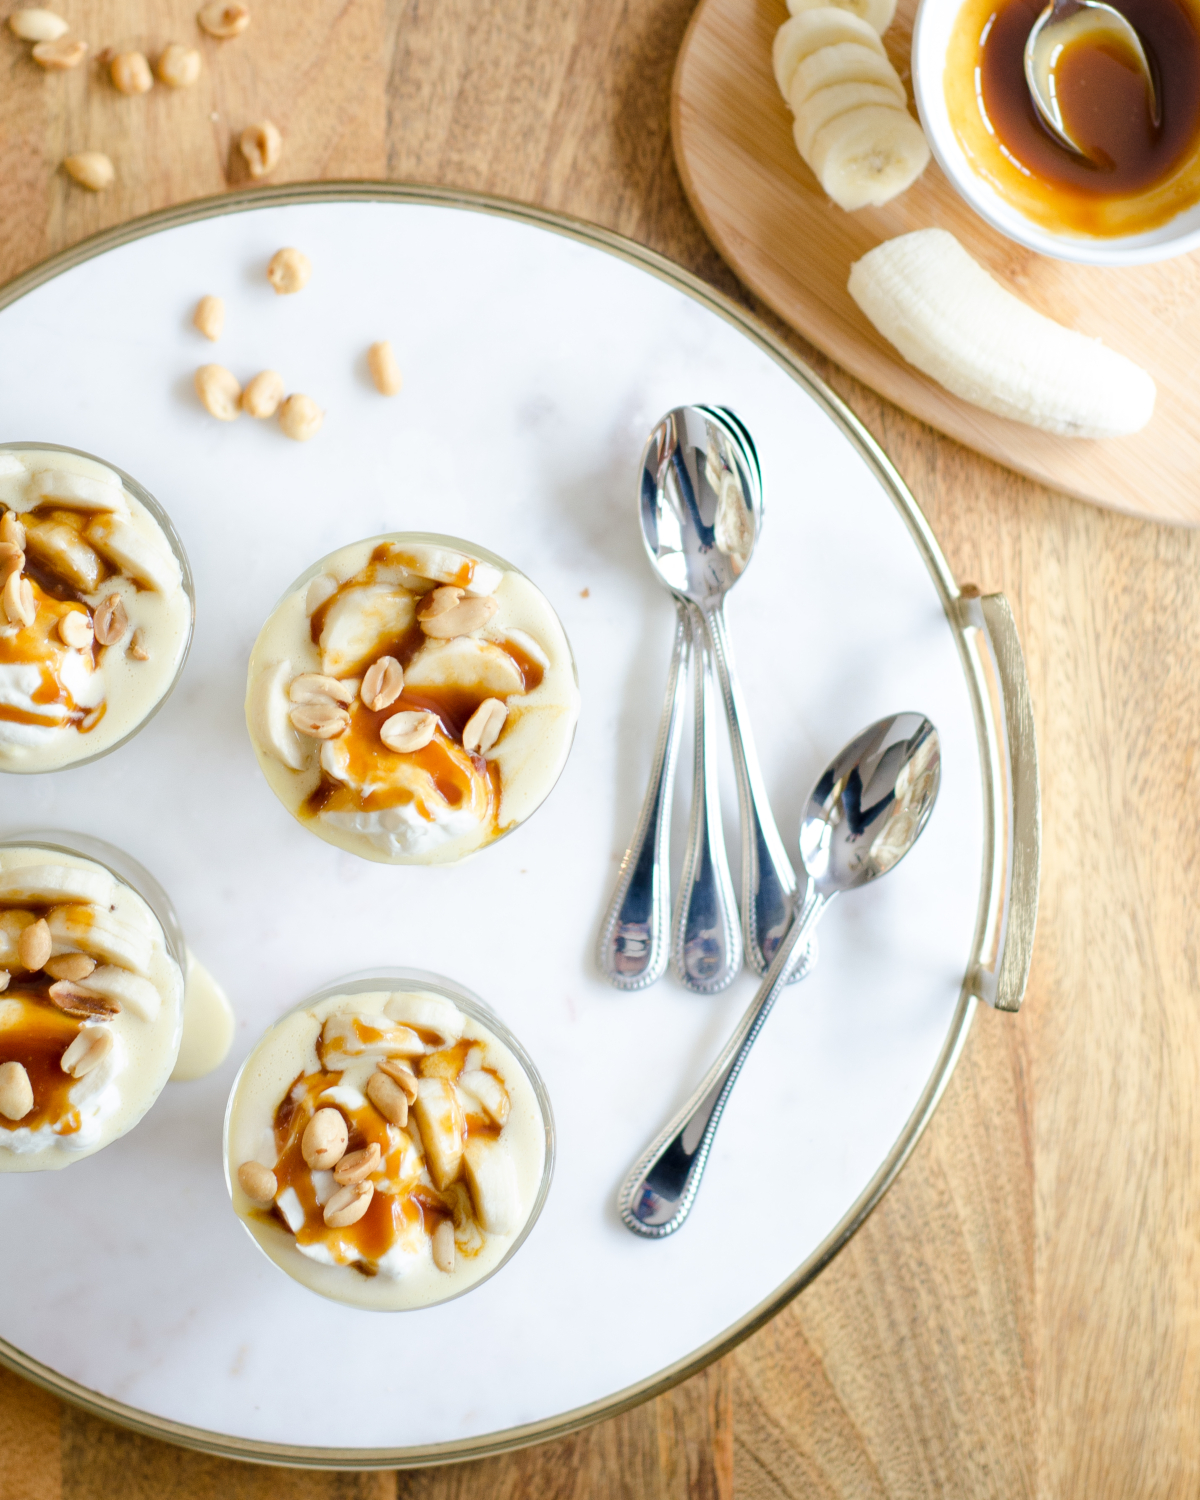 Gluten free banana cream pie recipe, in parfait form! Gorgeous individual dessert servings topped with salted caramel and peanuts for a banana cream pie like you've never tasted before!